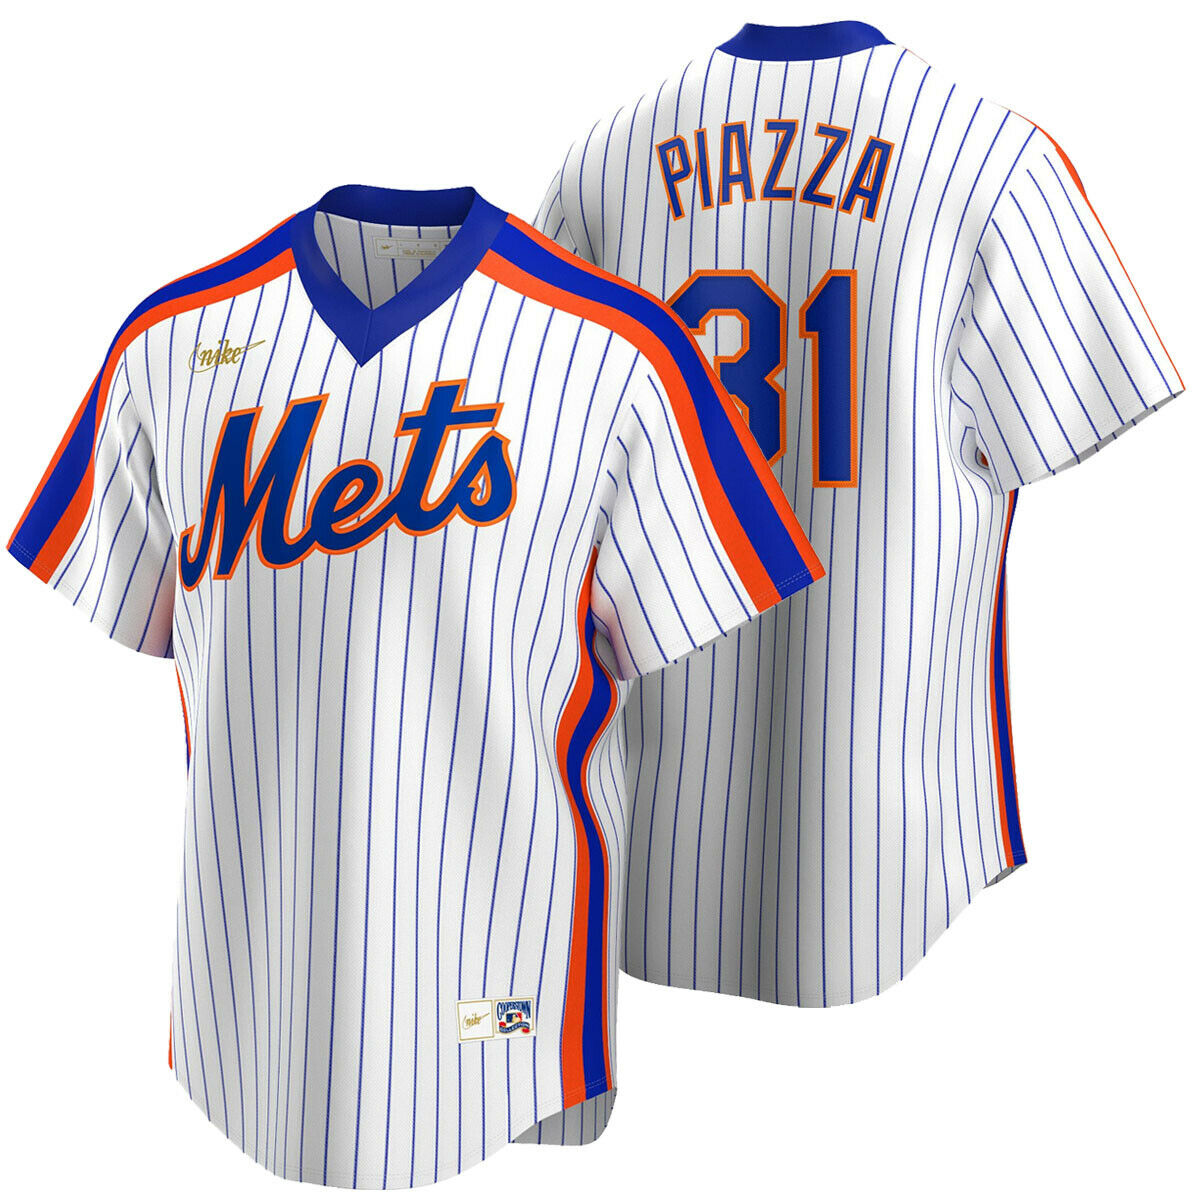 Men’s Nike Mike Piazza New York Mets Cooperstown Collection Royal Pinstripe Replica Jersey